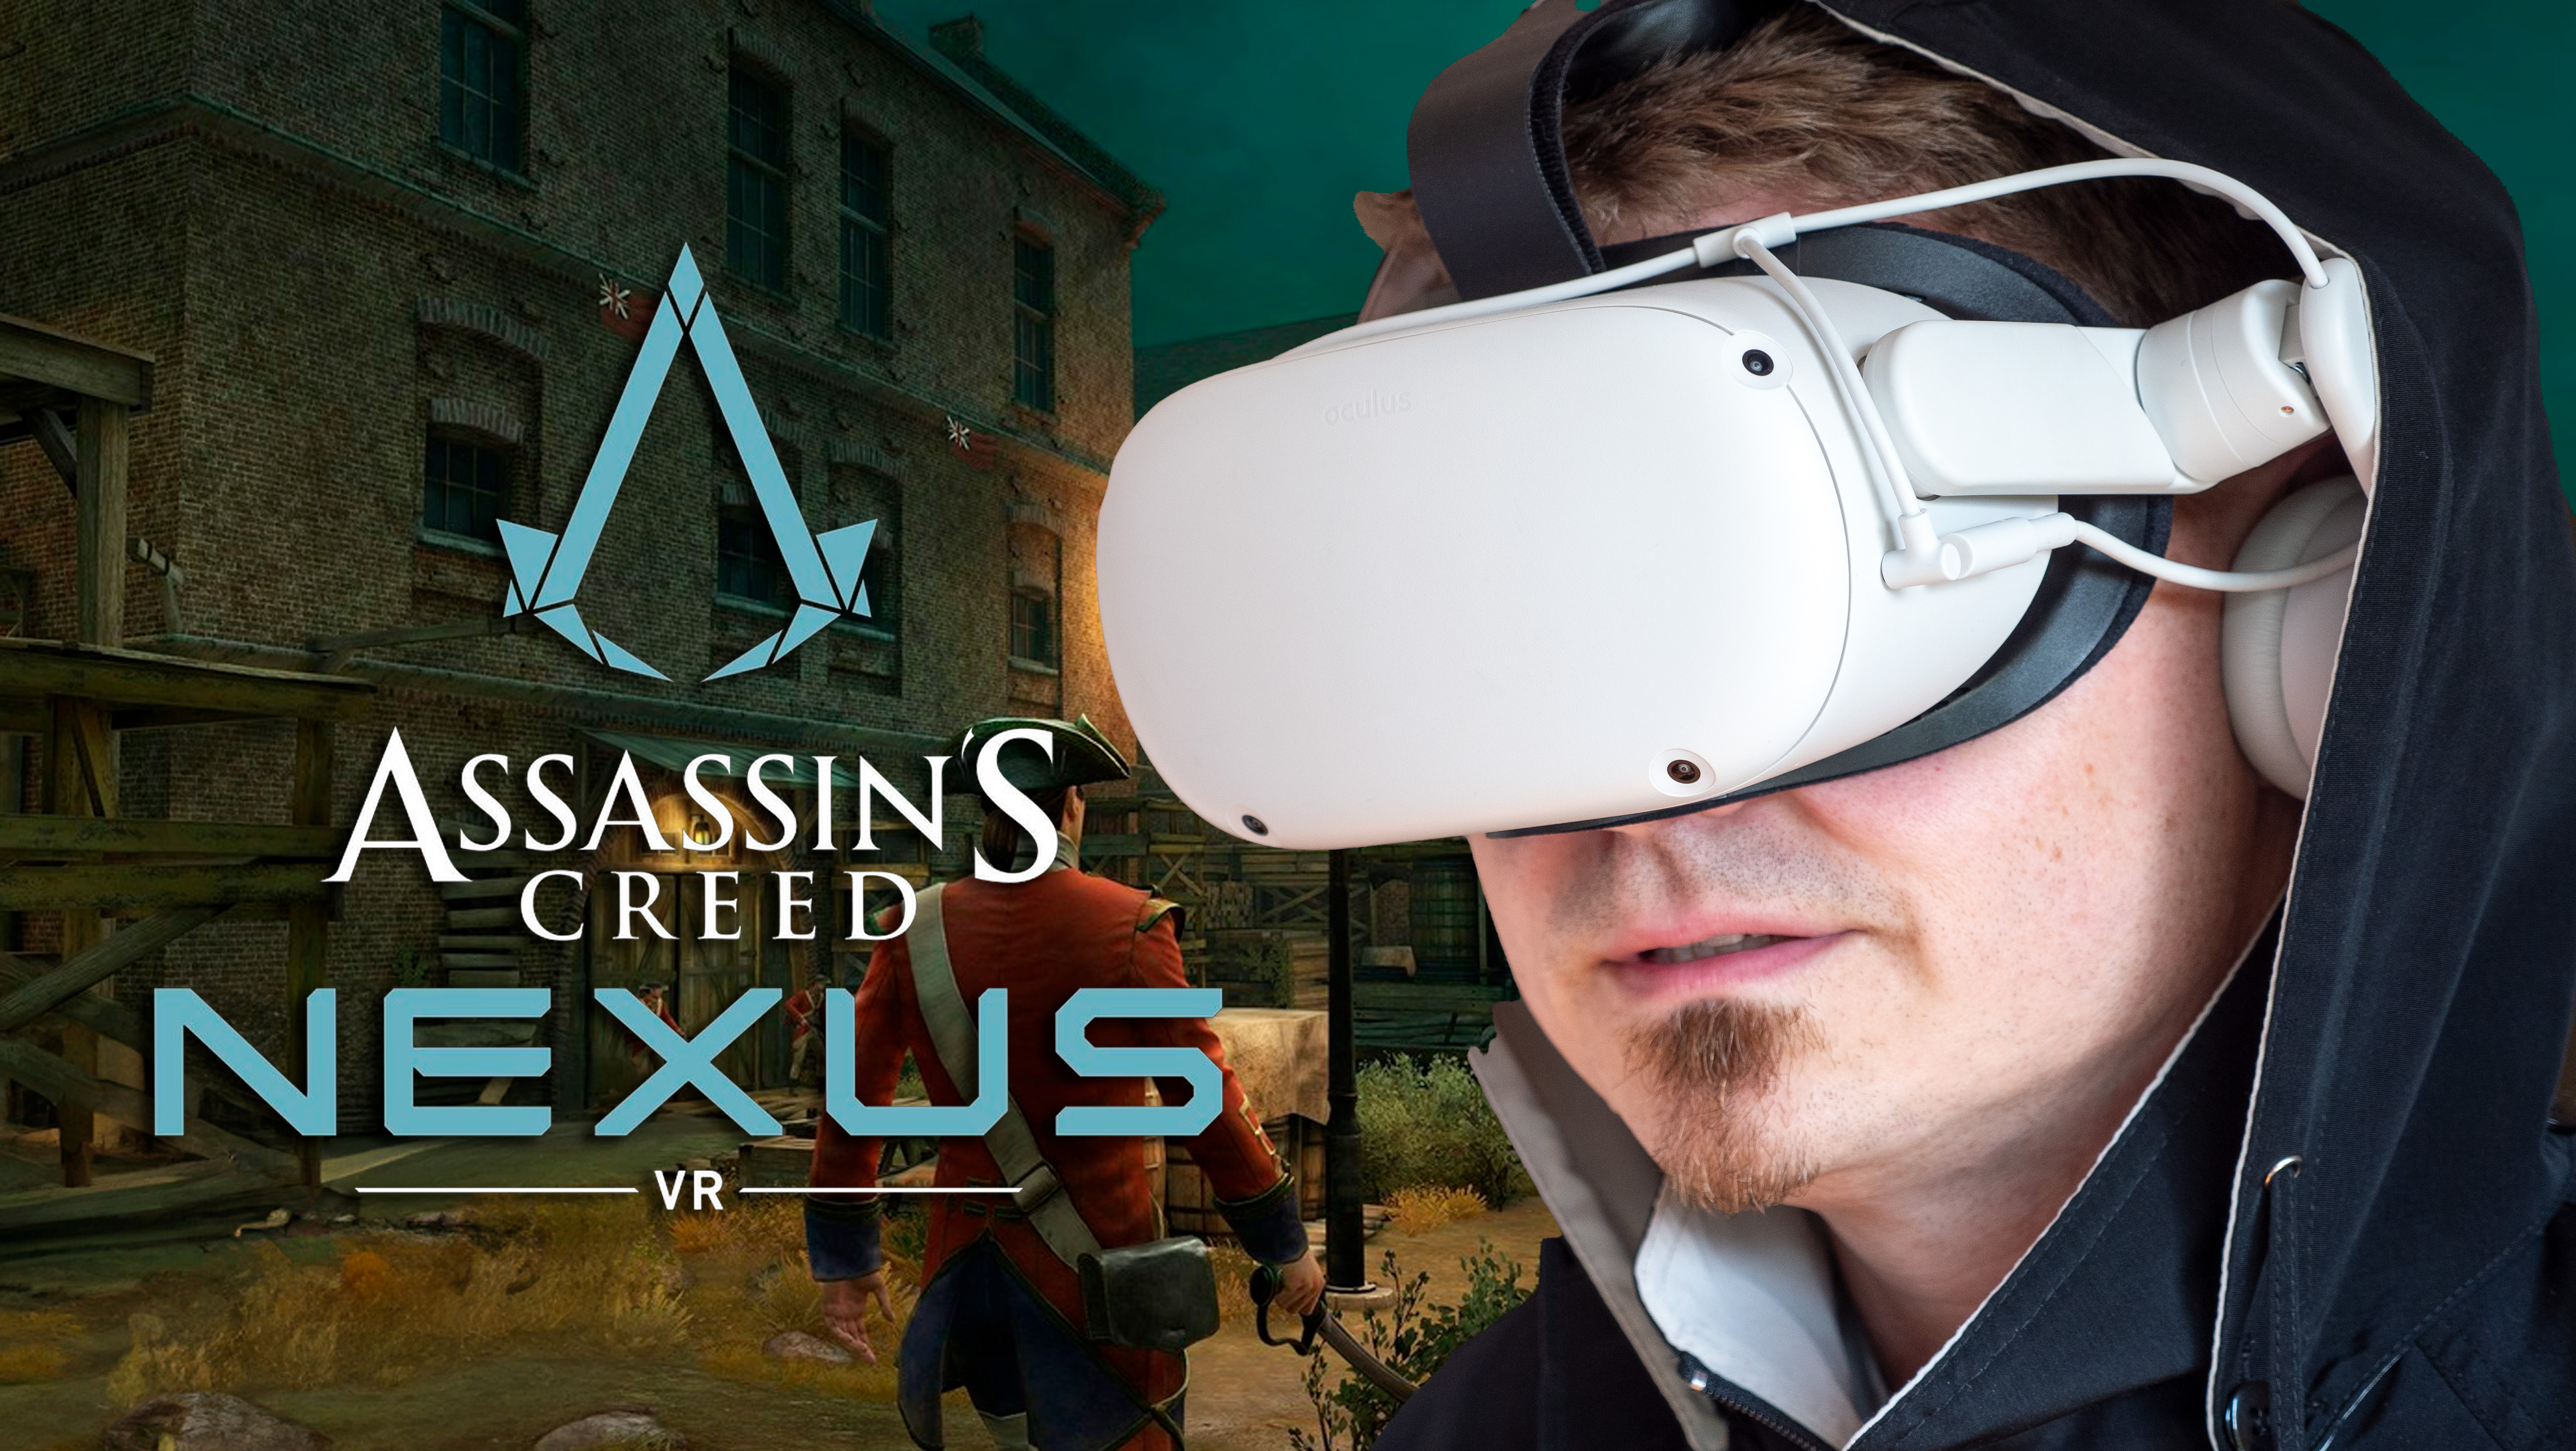 Assassin's Creed Nexus VR Trailer Revealed, Coming to Quest 2 This